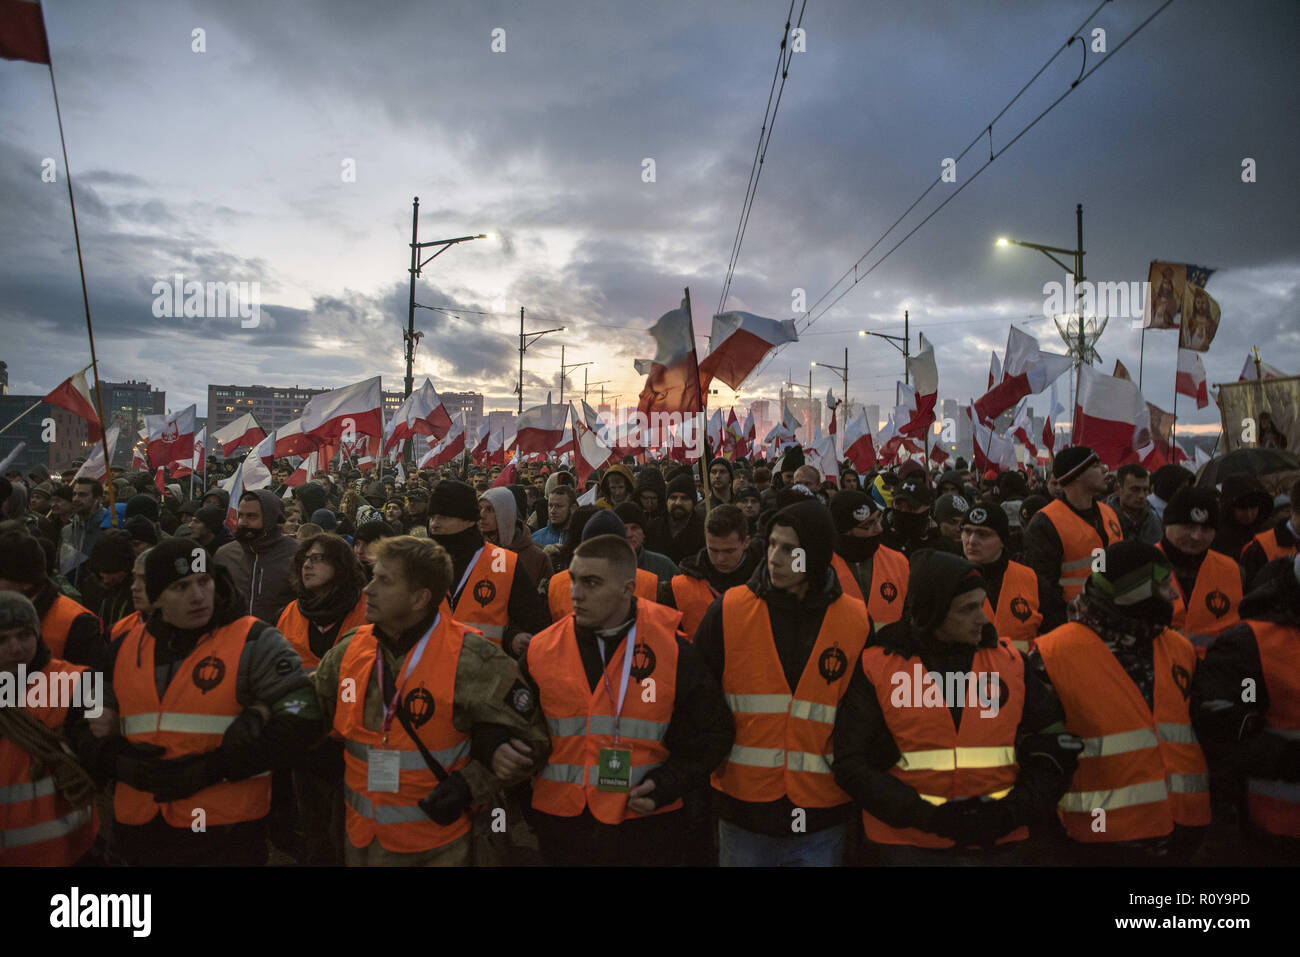 November 11, 2017 - Warsaw, mazowieckie, Poland - Huge crowds seen marching in the streets with reflector jackets during the demonstration.Last year about 60,000 people took part in the nationalist march marking Poland's Independence Day, according to police figures. The march has taken place each year on November 11th for almost a decade, and has grown to draw tens of thousands of participants, including extremists from across the EU.Warsaw's mayor Hanna Gronkiewicz-Waltz has banned the event. Organizers said they would appeal against the decision, insisting they would go ahead with the Stock Photo